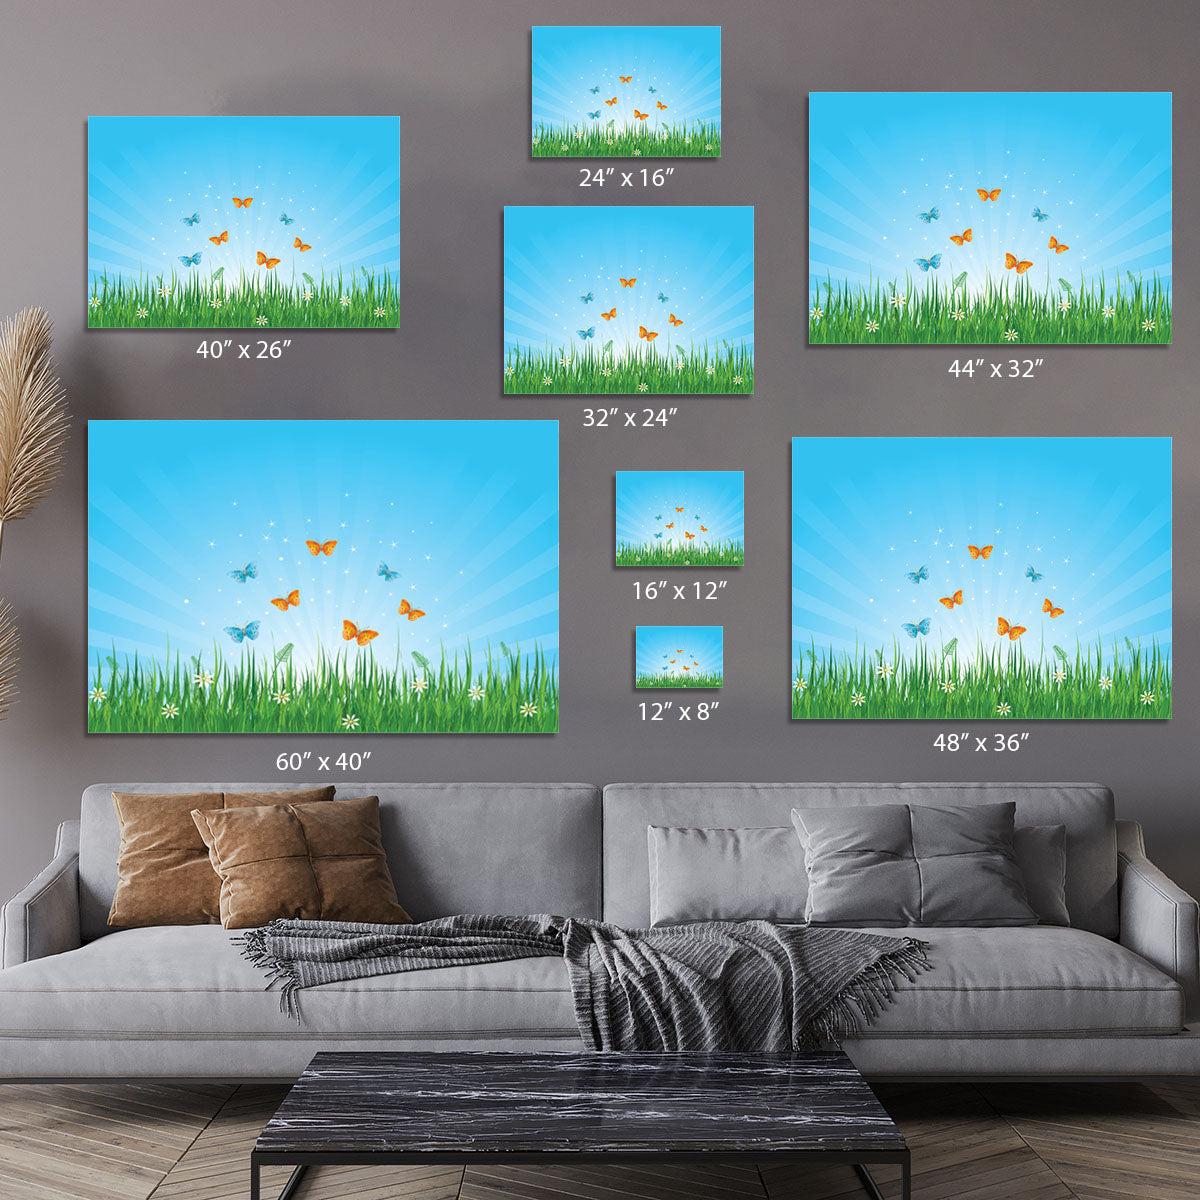 illustration of grassy field and butterflies Canvas Print or Poster - Canvas Art Rocks - 7